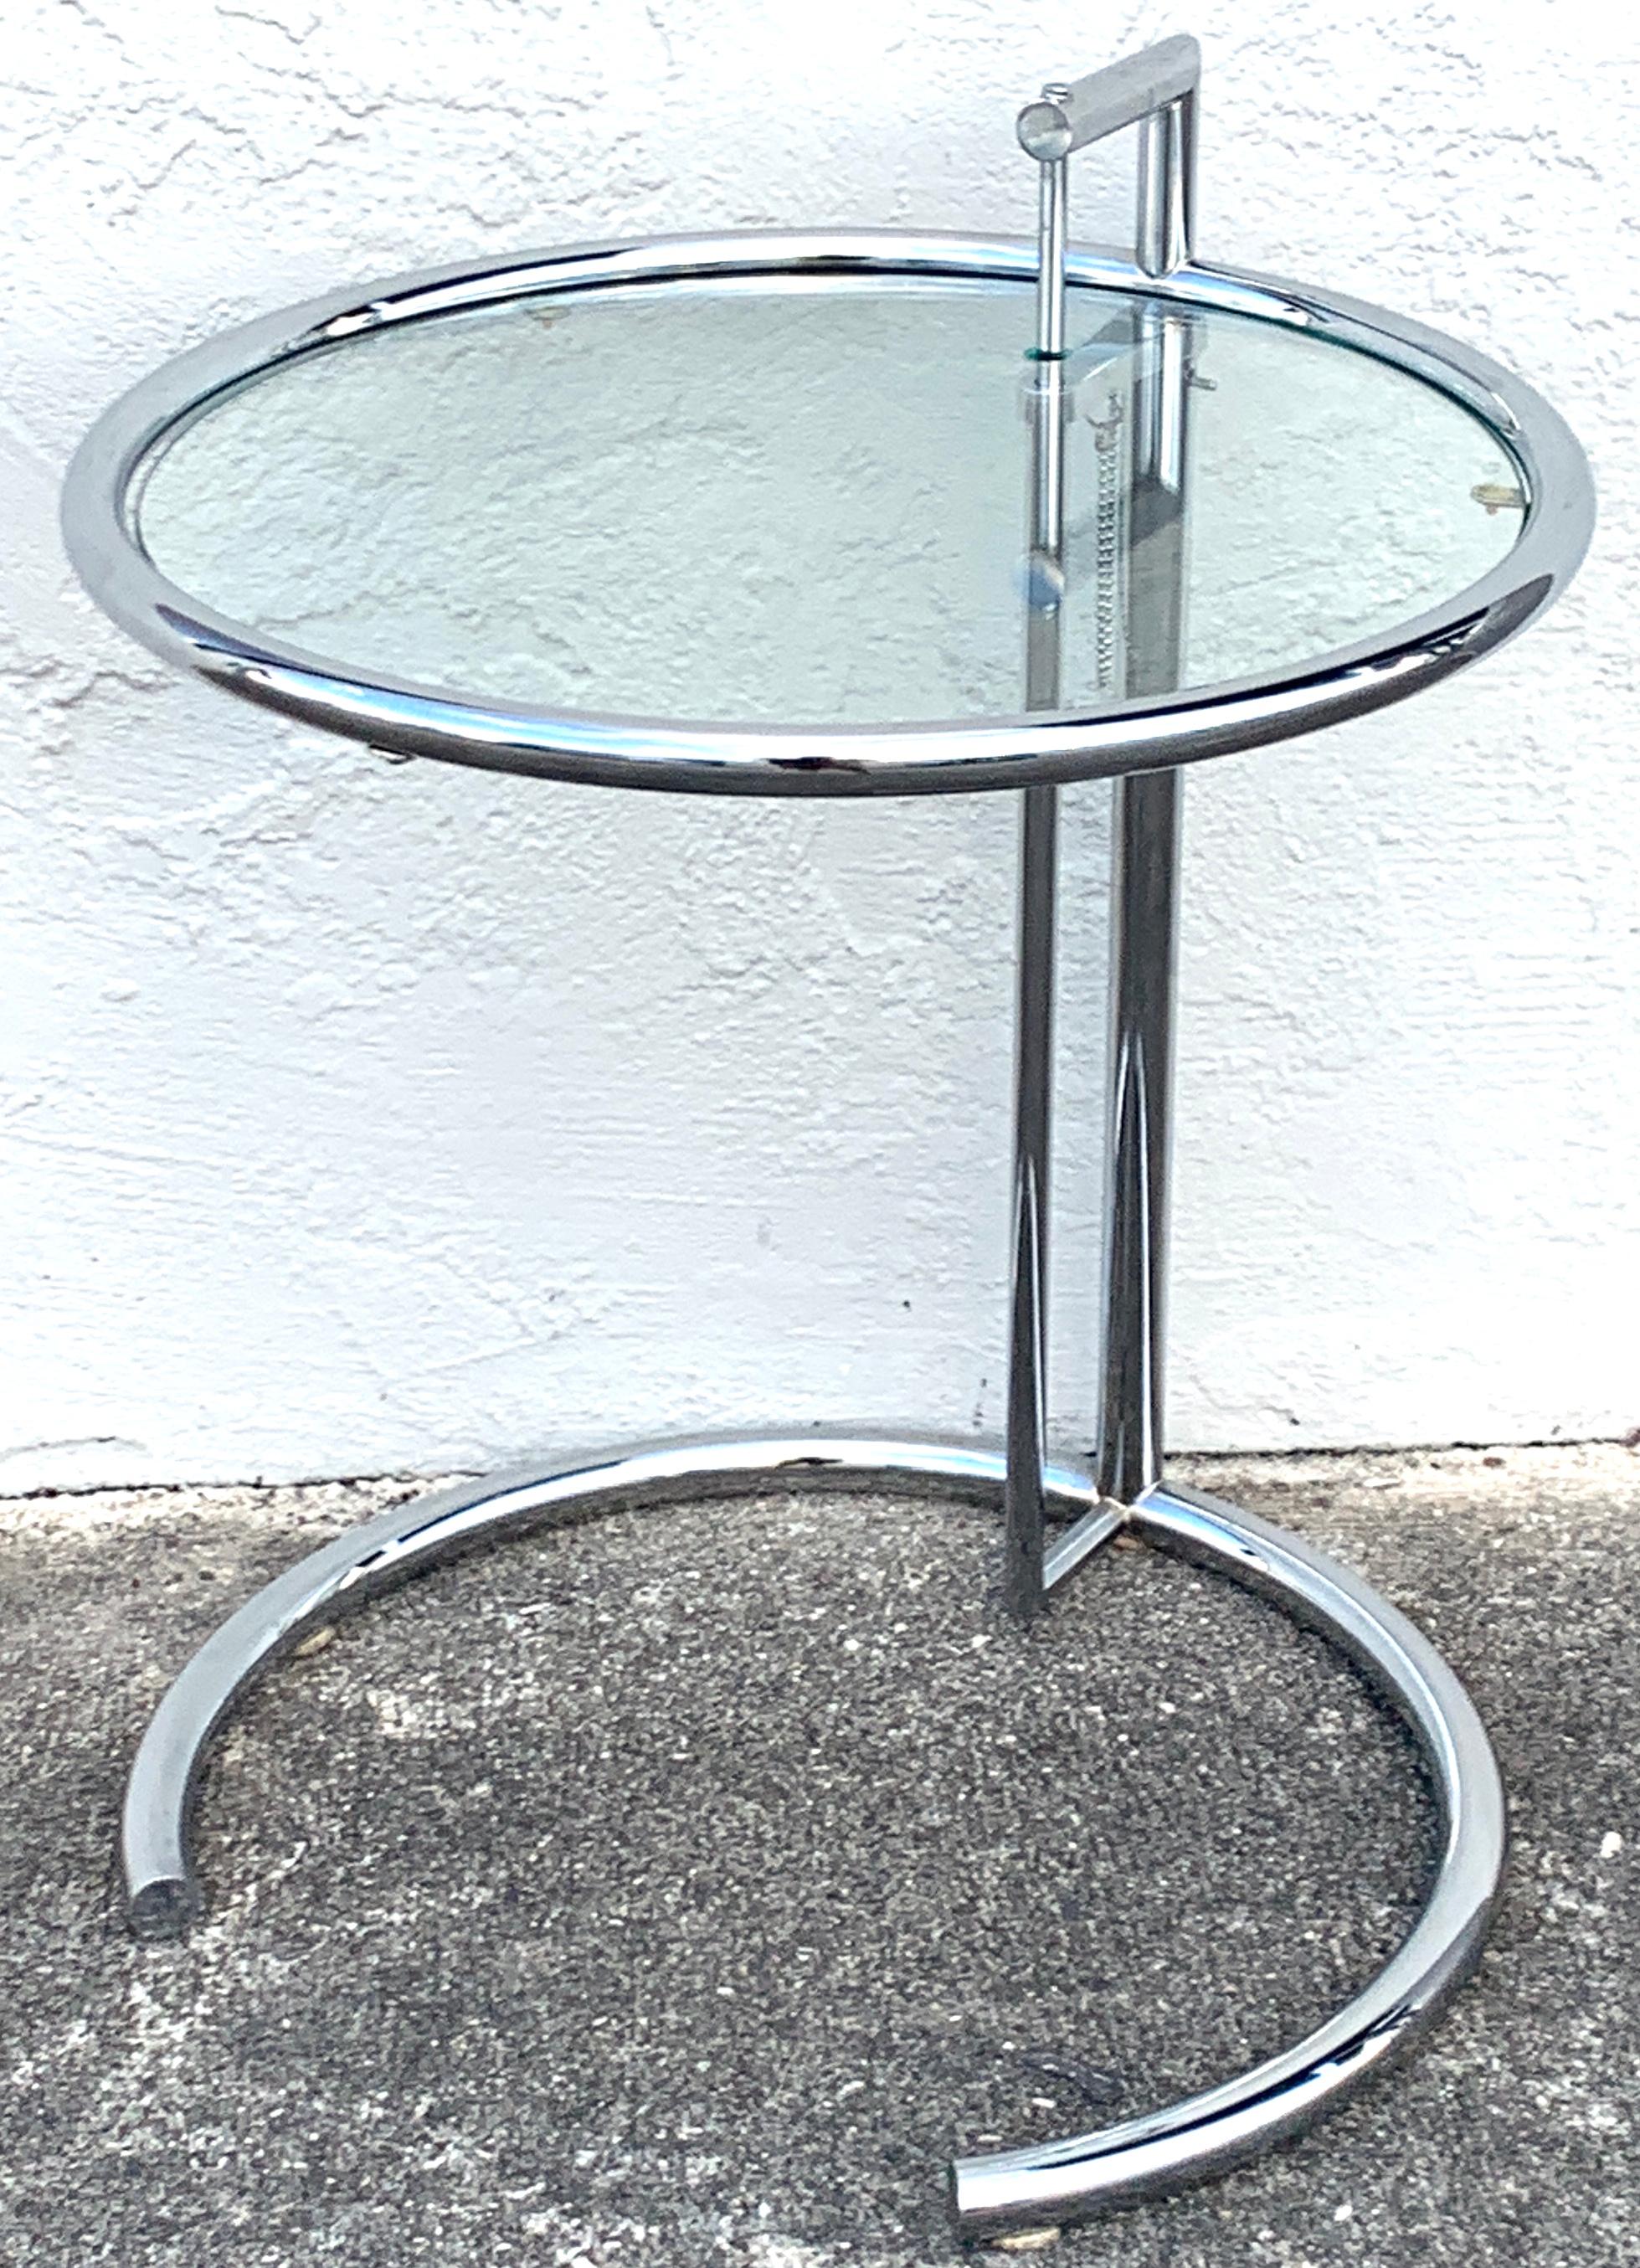 Pair of polished chrome and glass E-1027 side tables, in the style of  Eileen Gray
each one fine vintage models, with no chips, or missing pieces, fresh from a Palm Beach estate.
         